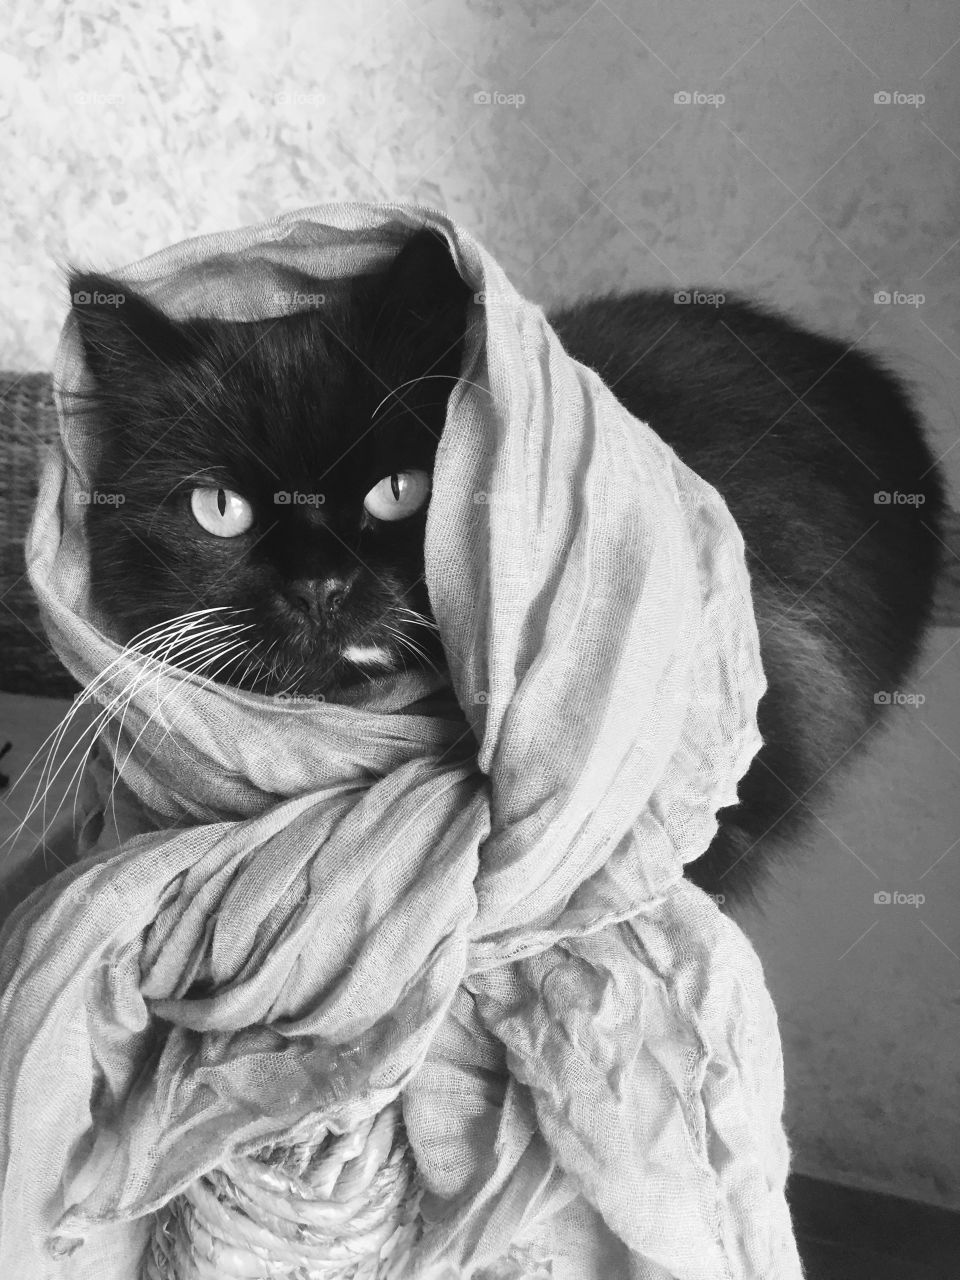 Cat wrapped in scarf